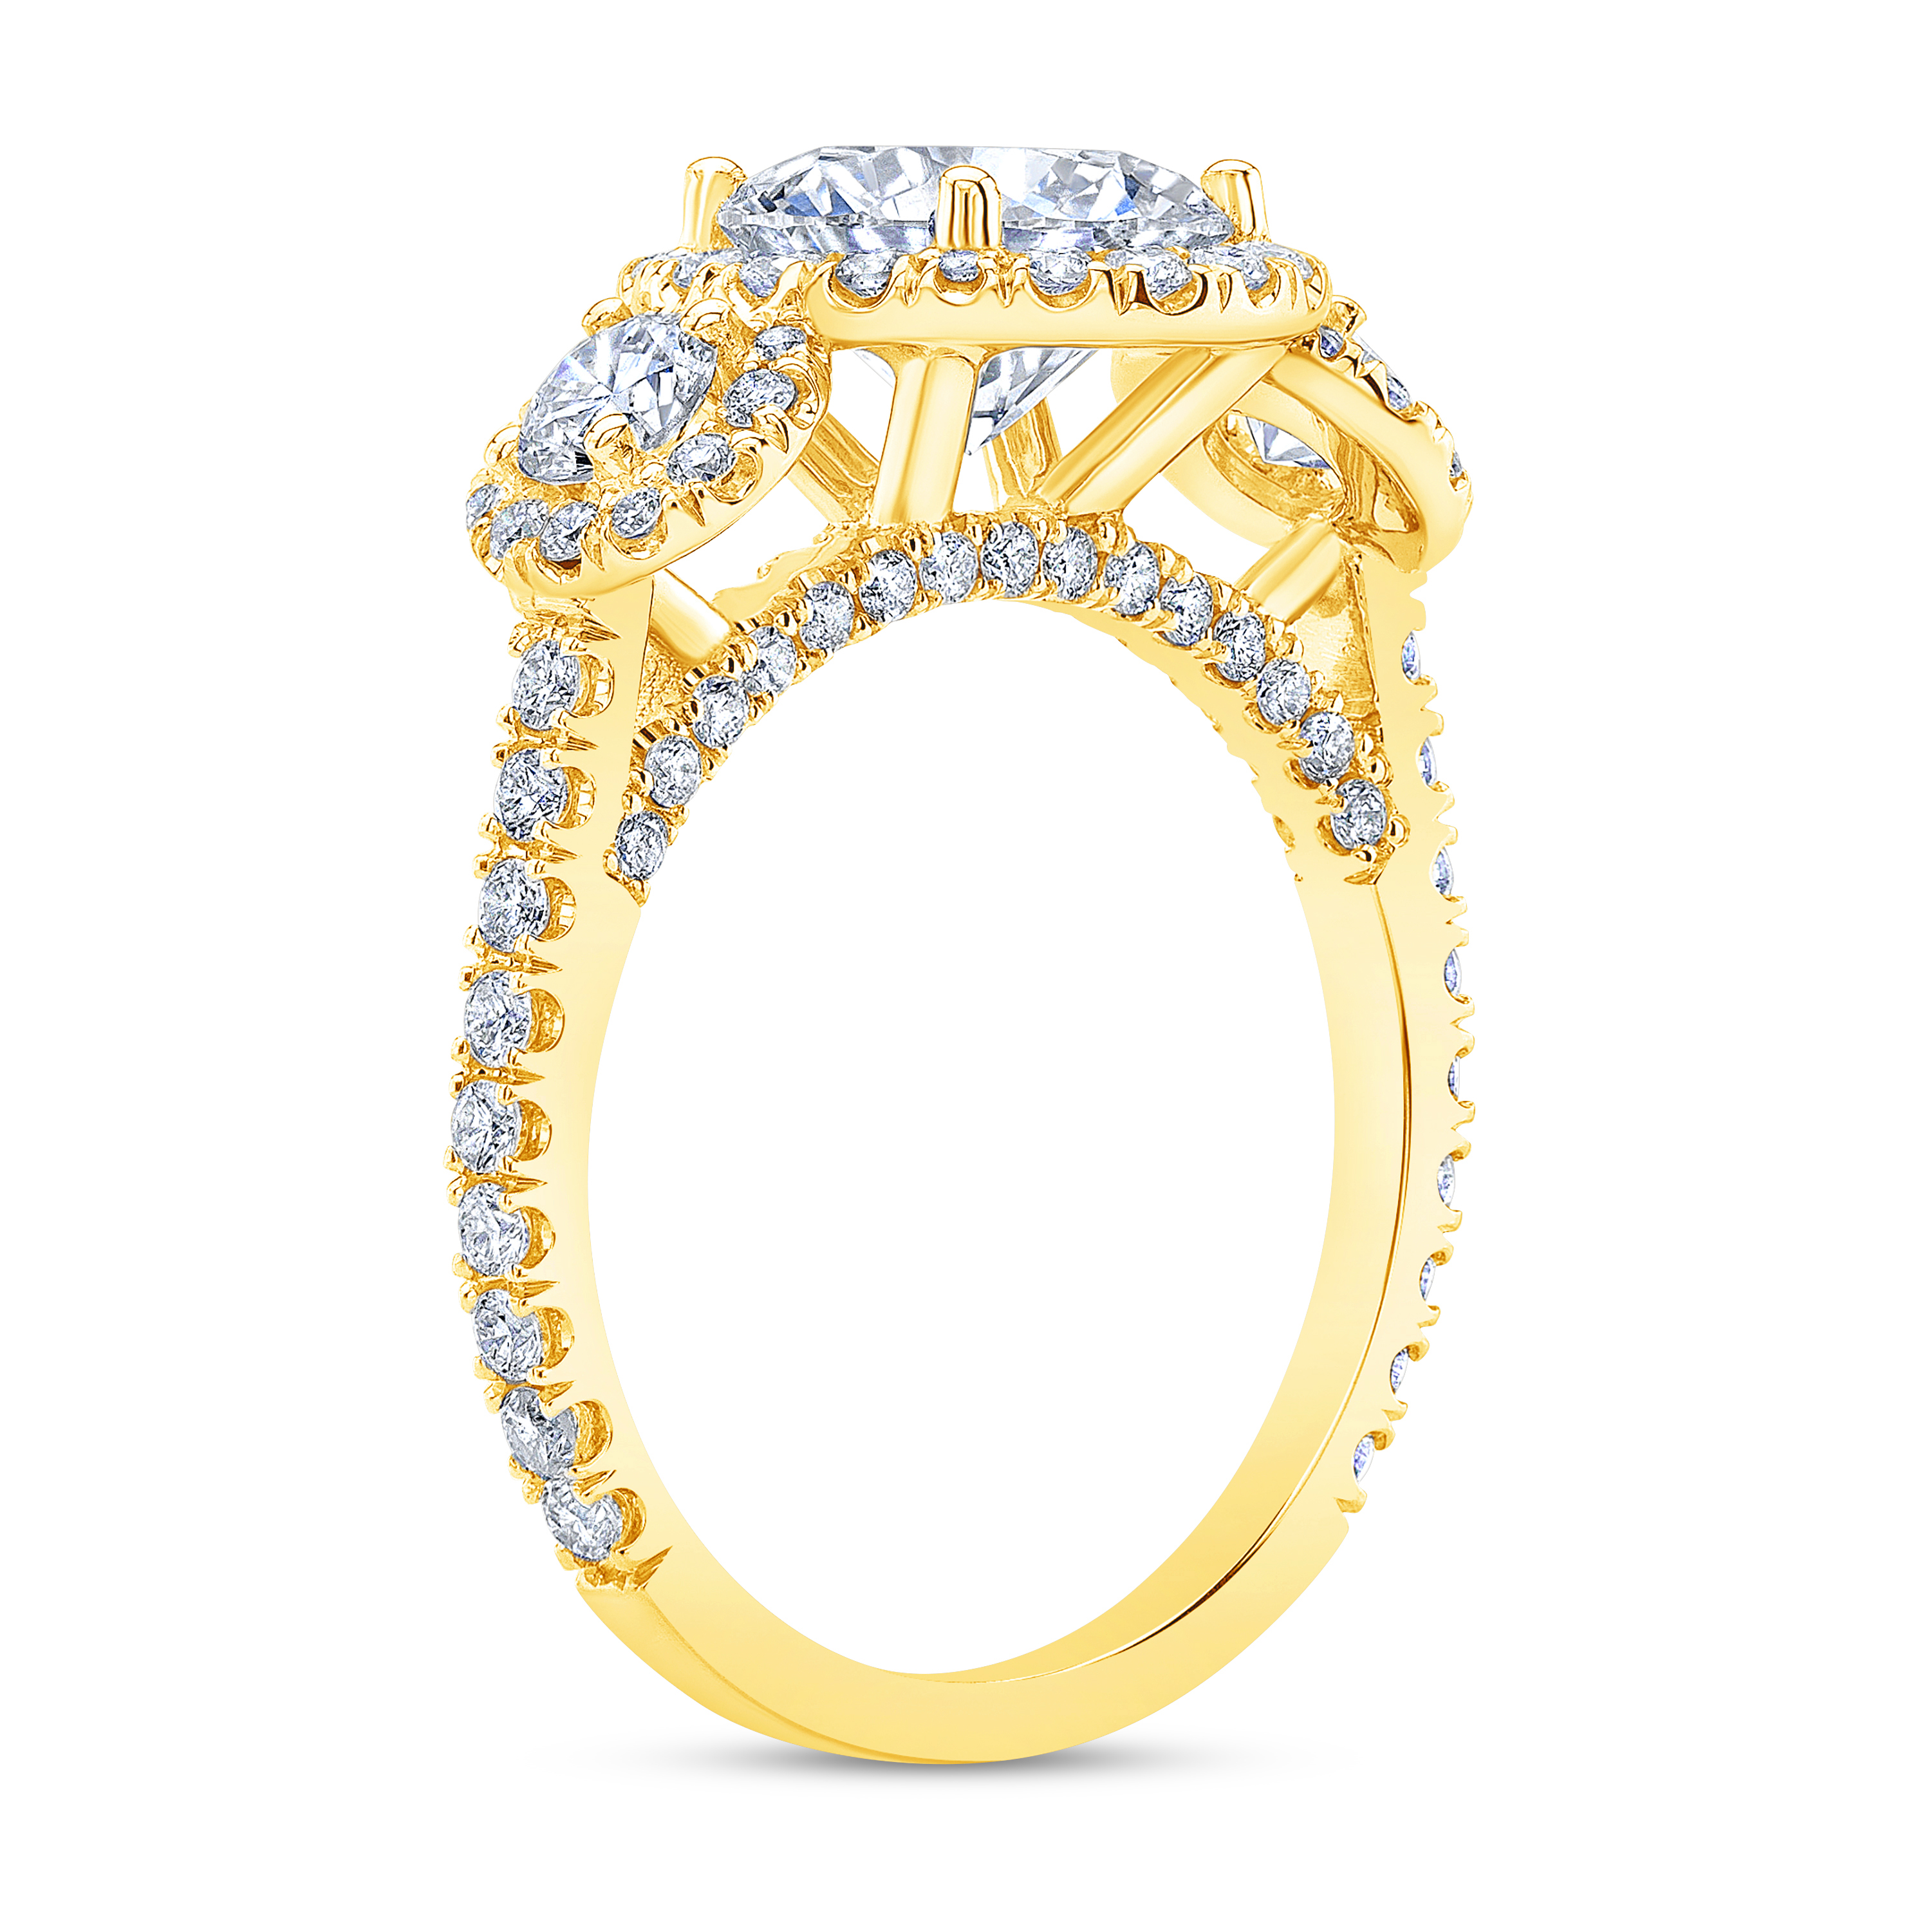 3 Stone Halo Pave Diamond Engagement Ring in yellow gold 